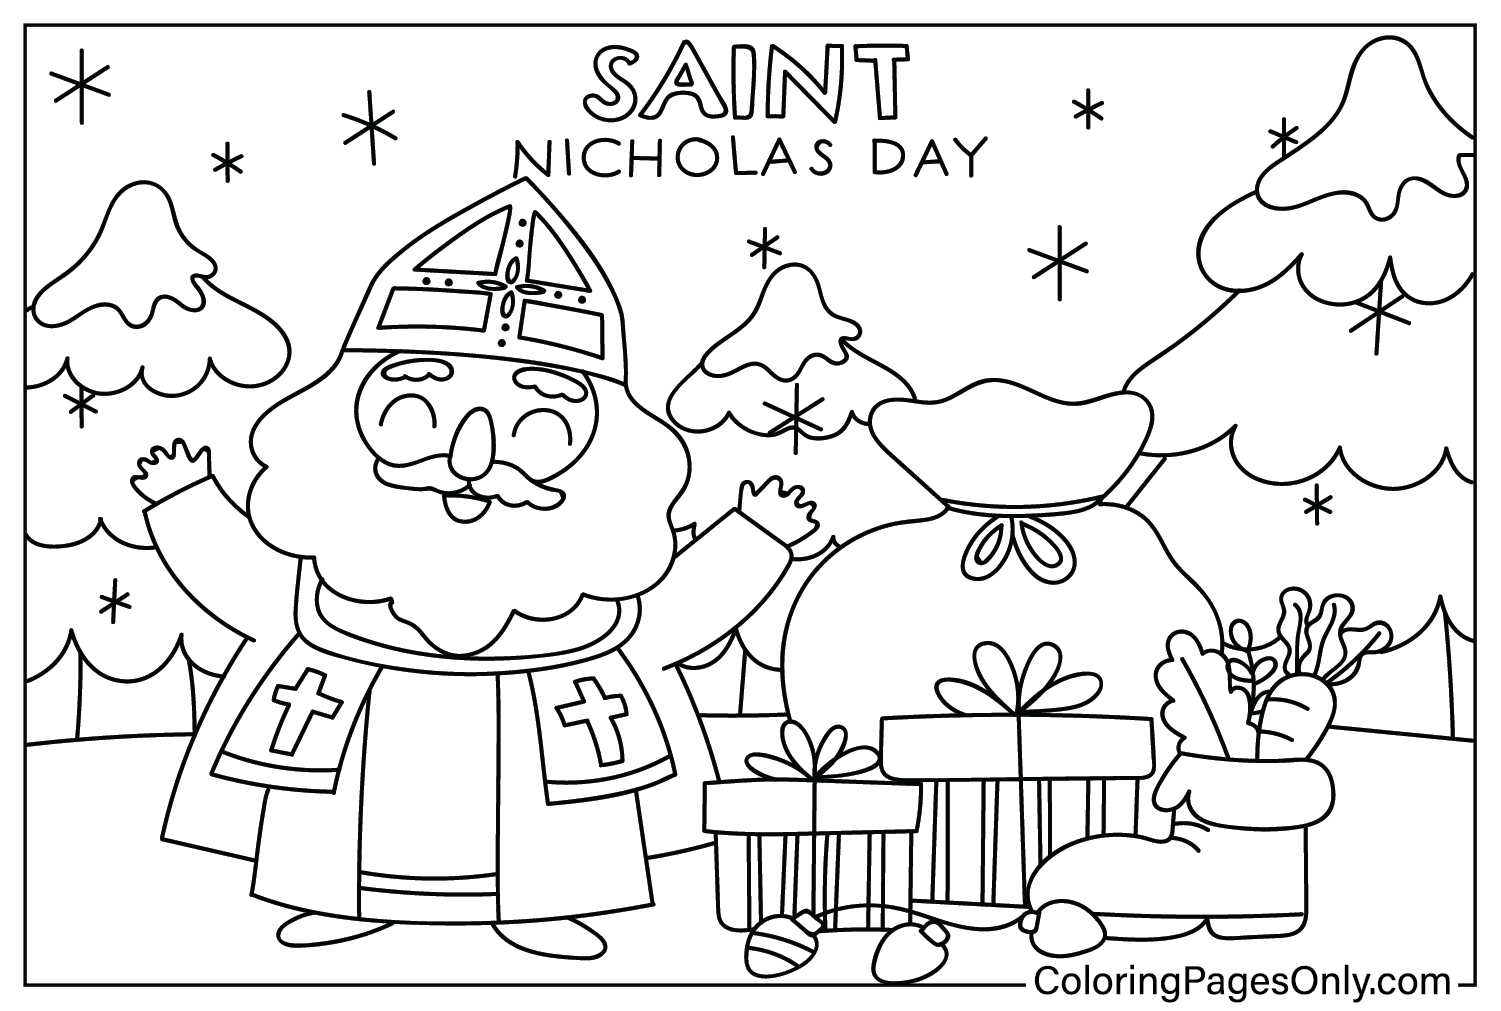 Saint Nicholas Day Coloring Page Free - Free Printable Coloring Pages